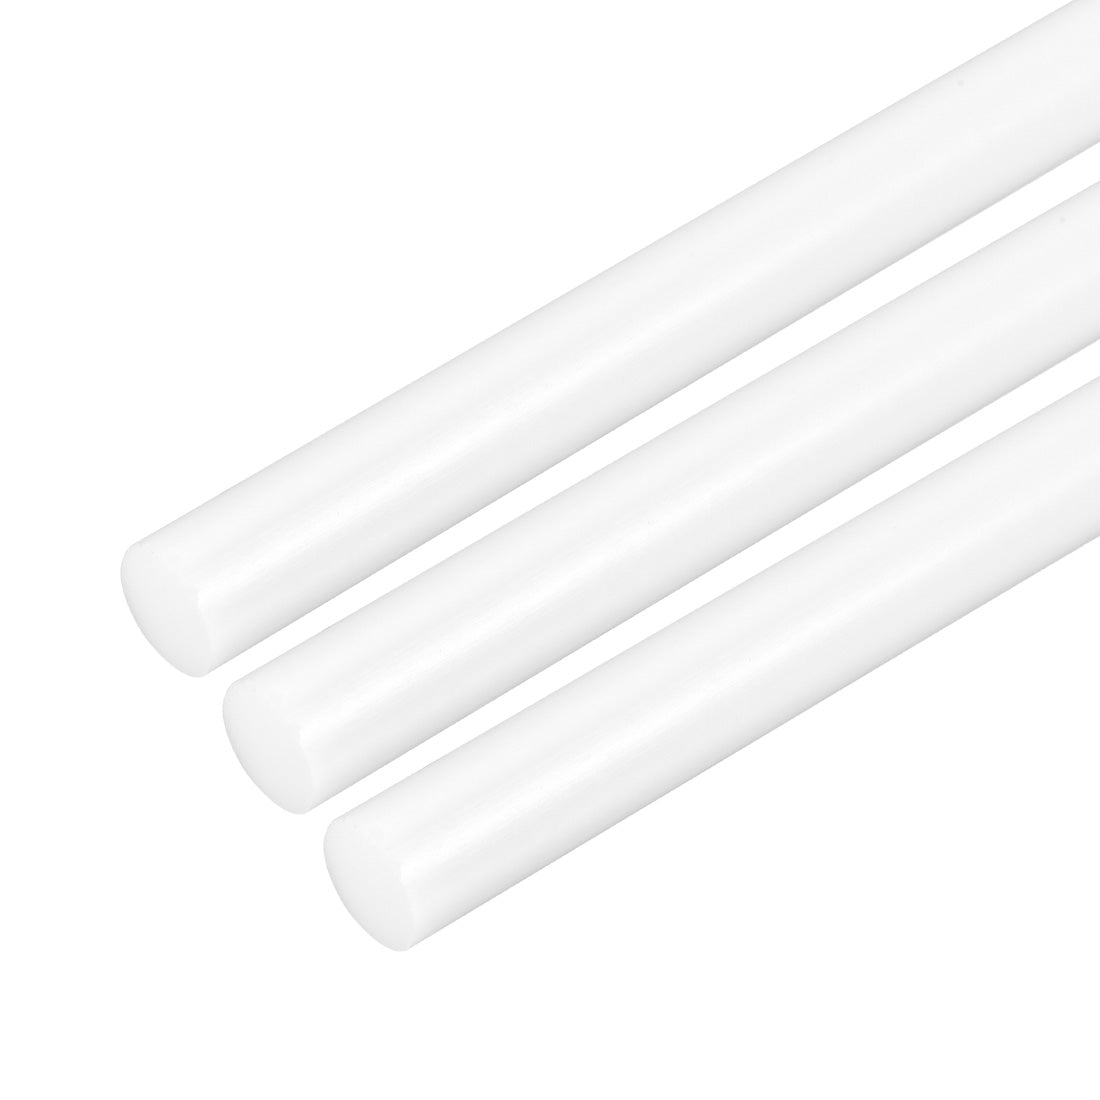 uxcell Uxcell Plastic Round Rod,12.5mm Dia 50cm White Engineering Plastic Round Bar 3pcs